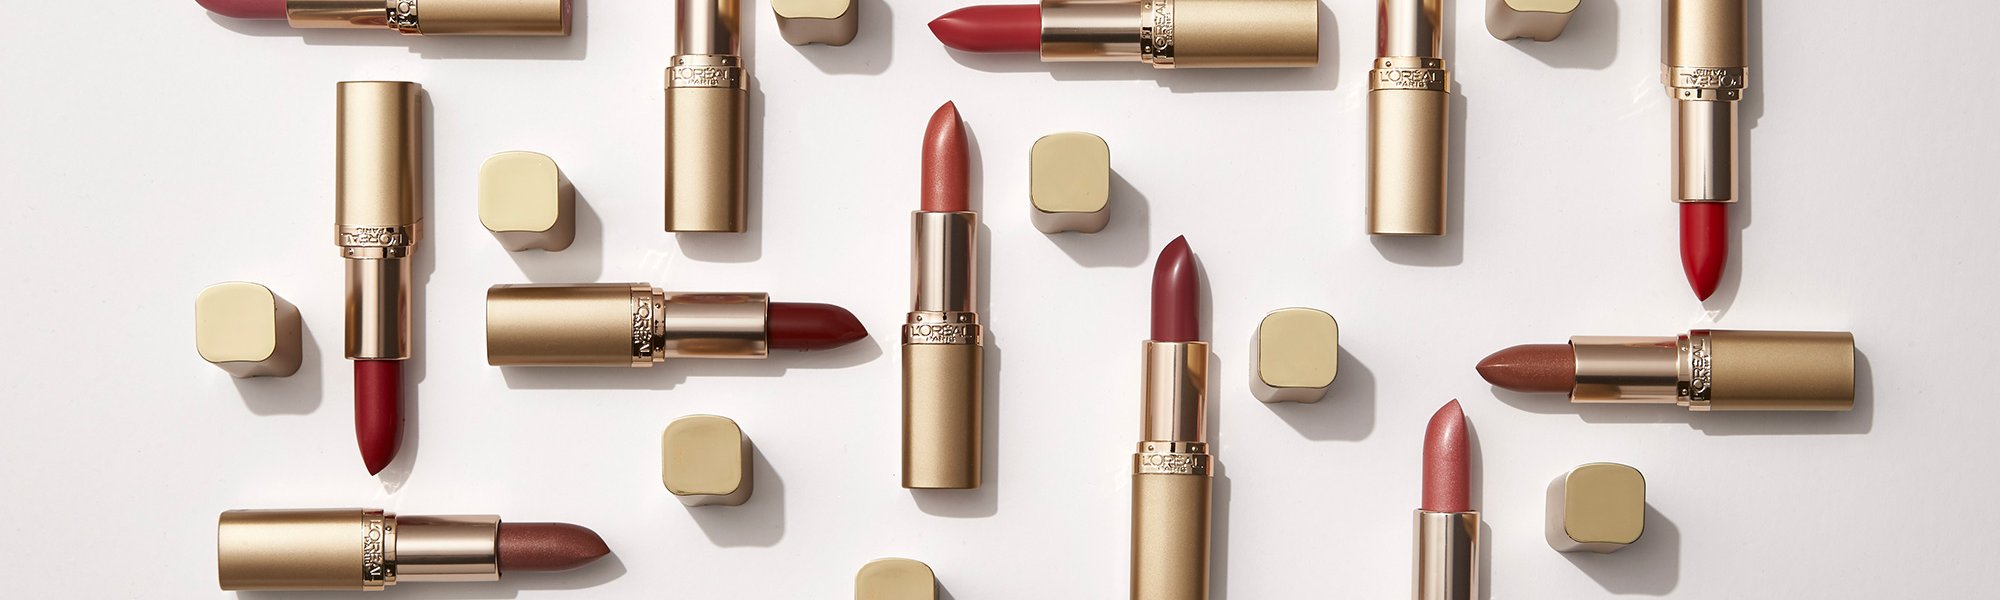 Lipstick Day The Best Red Lipsticks For Every Skin Tone